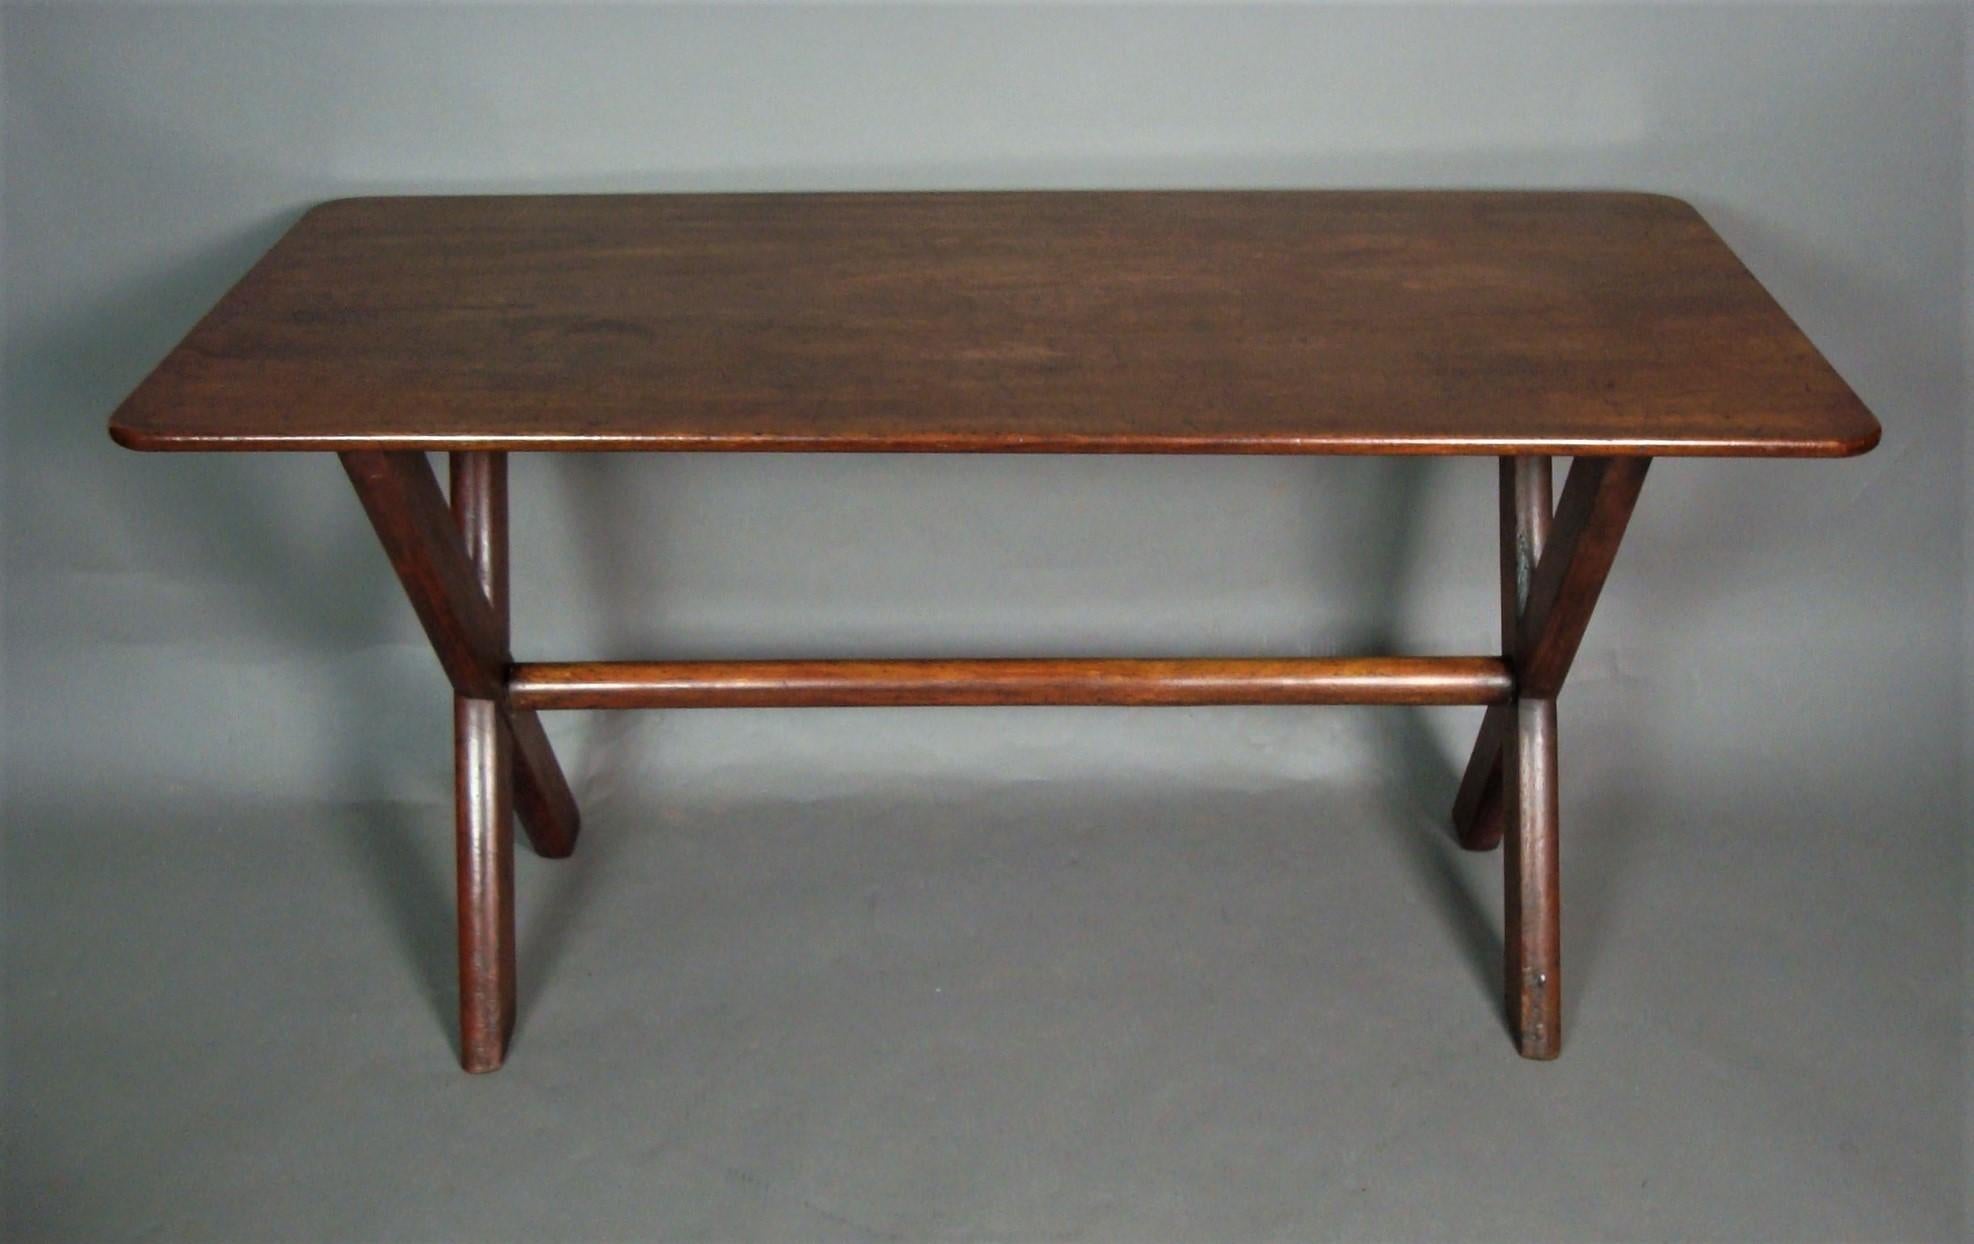 Late Georgian mahogany tavern table, the one piece mahogany rectangular top, with rounded corners raised on birch supports of typical x design, united by an unusual turned pole stretcher.
English, circa 1830
Good original condition, good colour